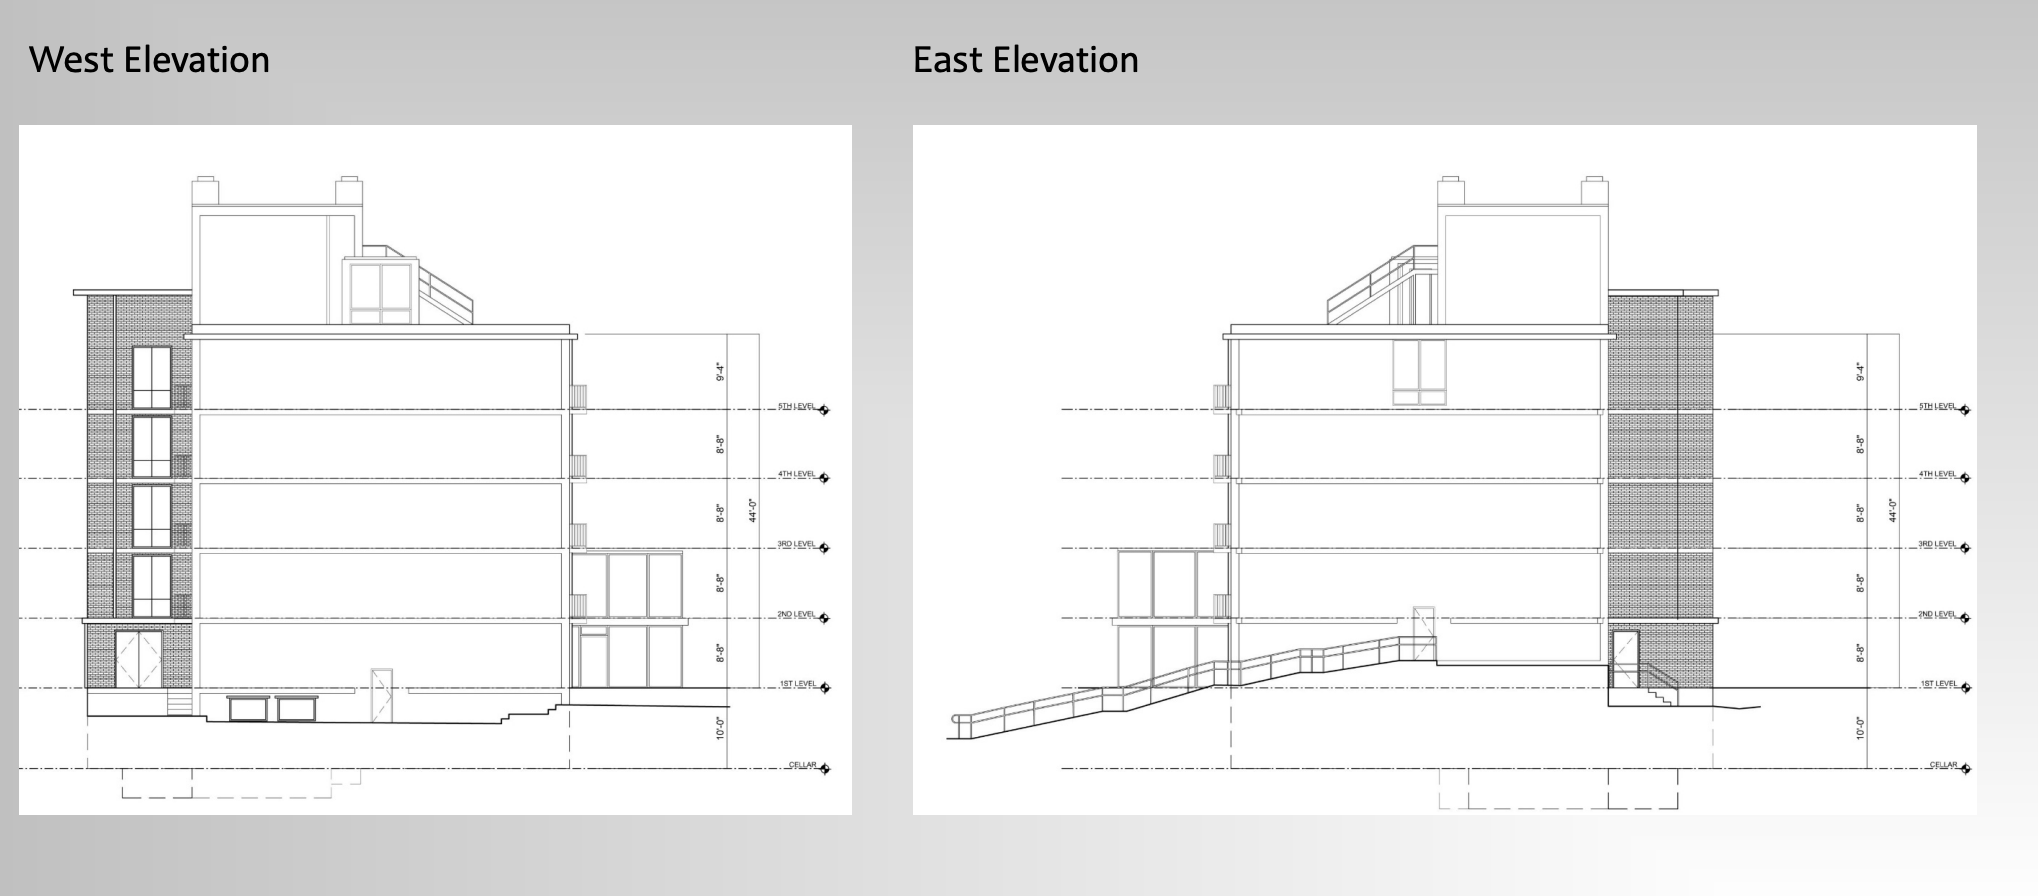 East/West Elevations